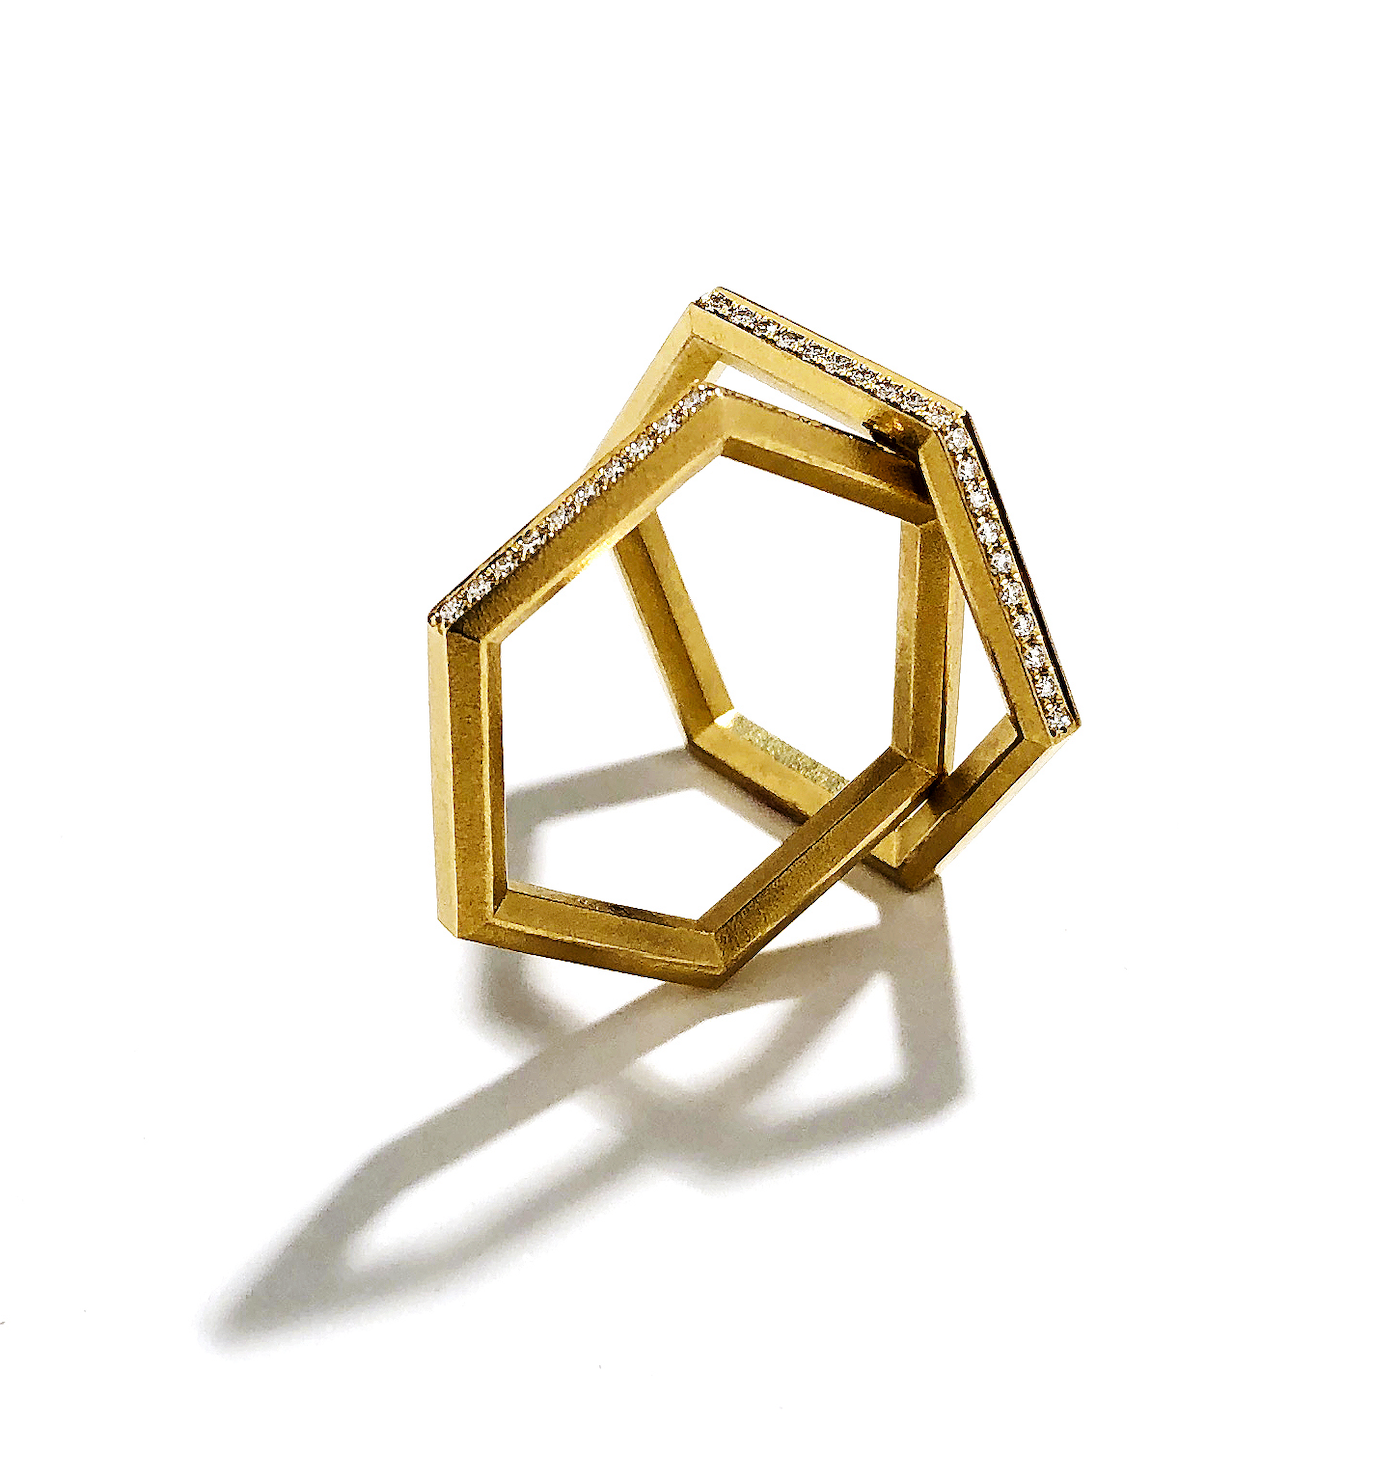 Hex Bevel Stacking Rings, by Geoffrey Good